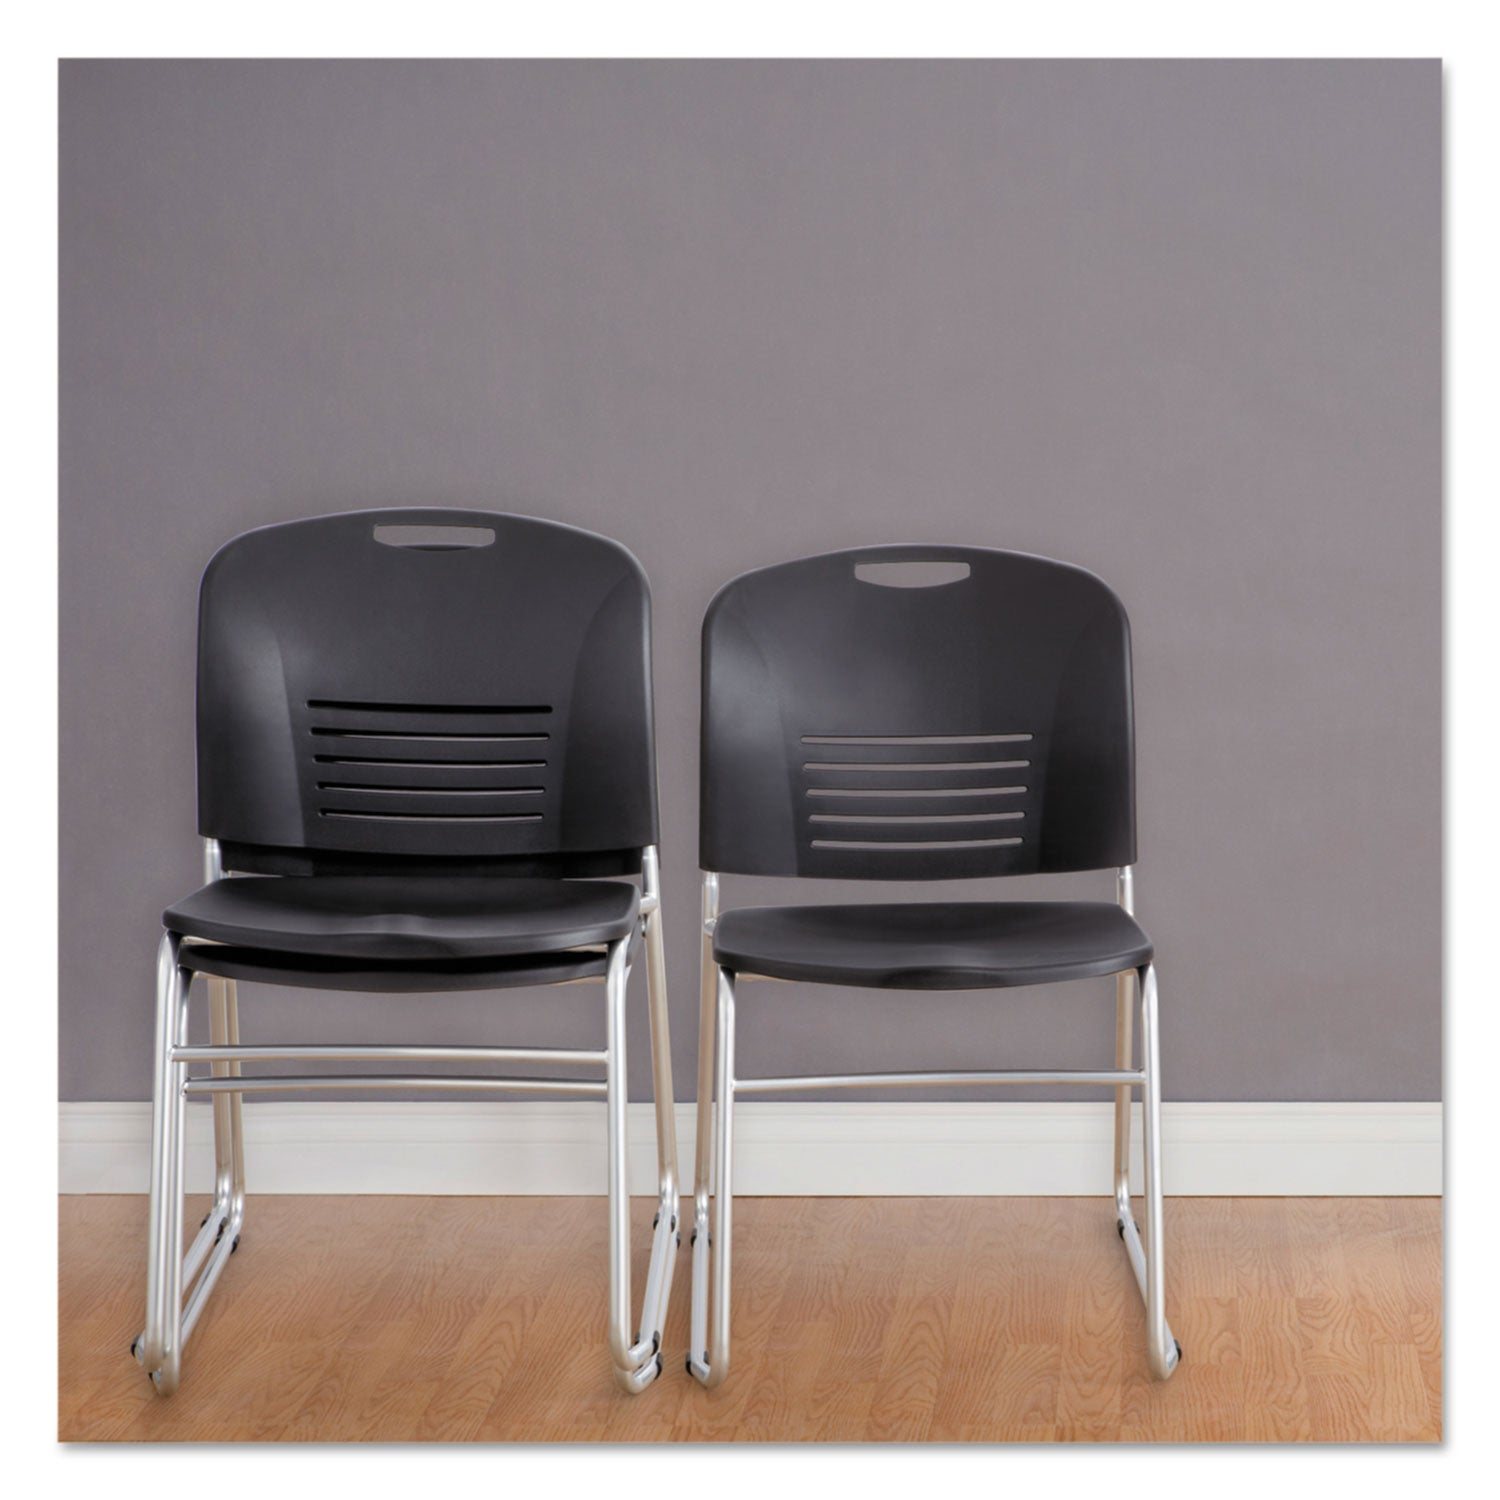 Vy Series Stack Chairs, Supports Up to 350 lb, 18.75" Seat Height, Black Seat, Black Back, Silver Base, 2/Carton - 